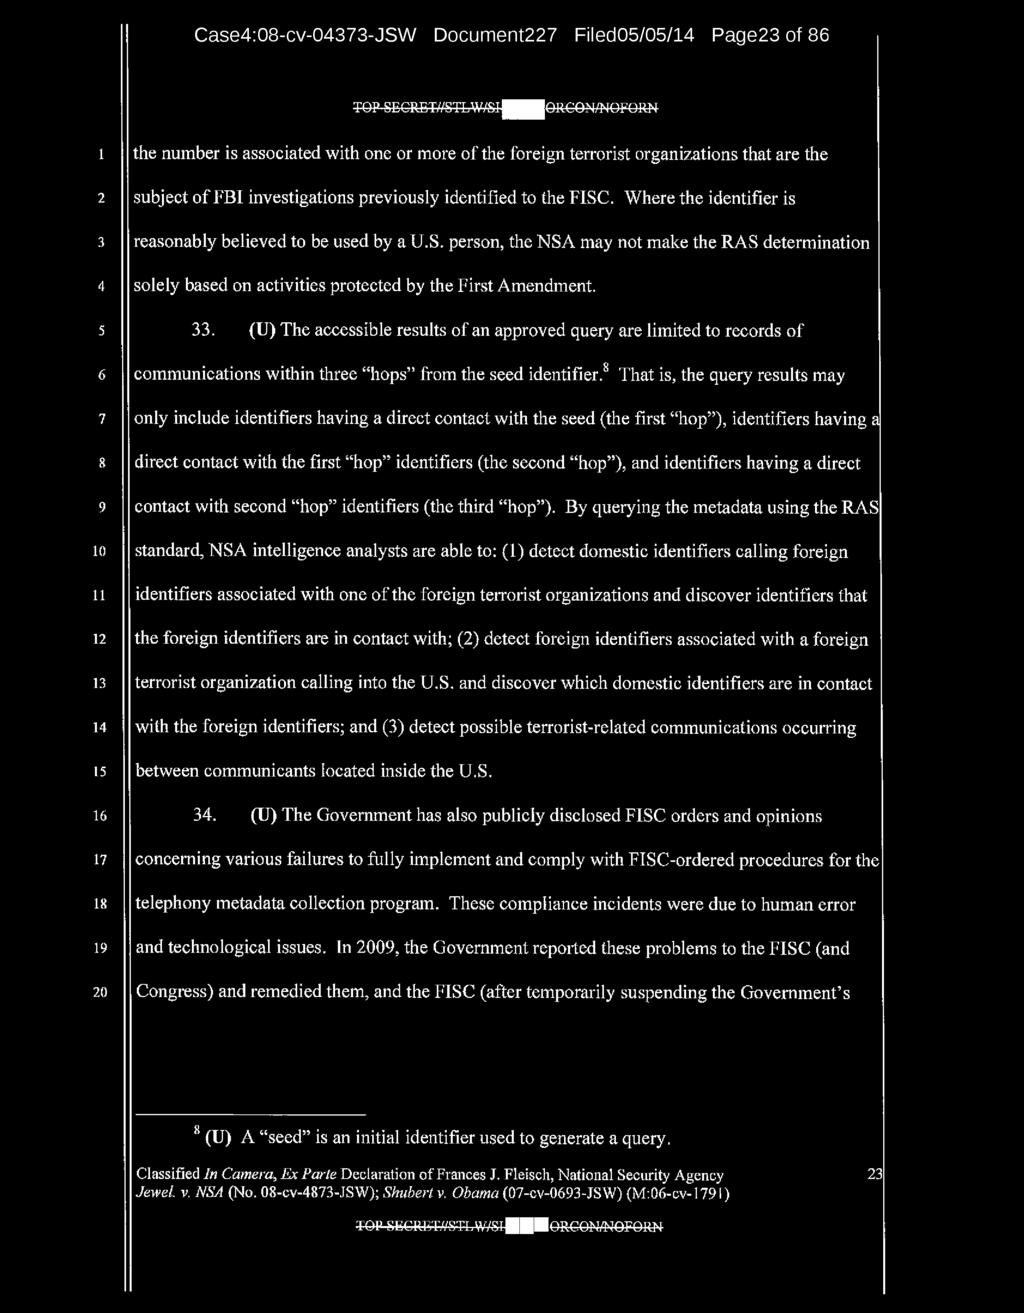 Case:0-cv-0-JSW Document Filed0/0/ Page of TOP SECRET//STbWSi^jUORCON/NOFORN the number is associated with one or more of the foreign terrorist organizations that are the subject of FBI